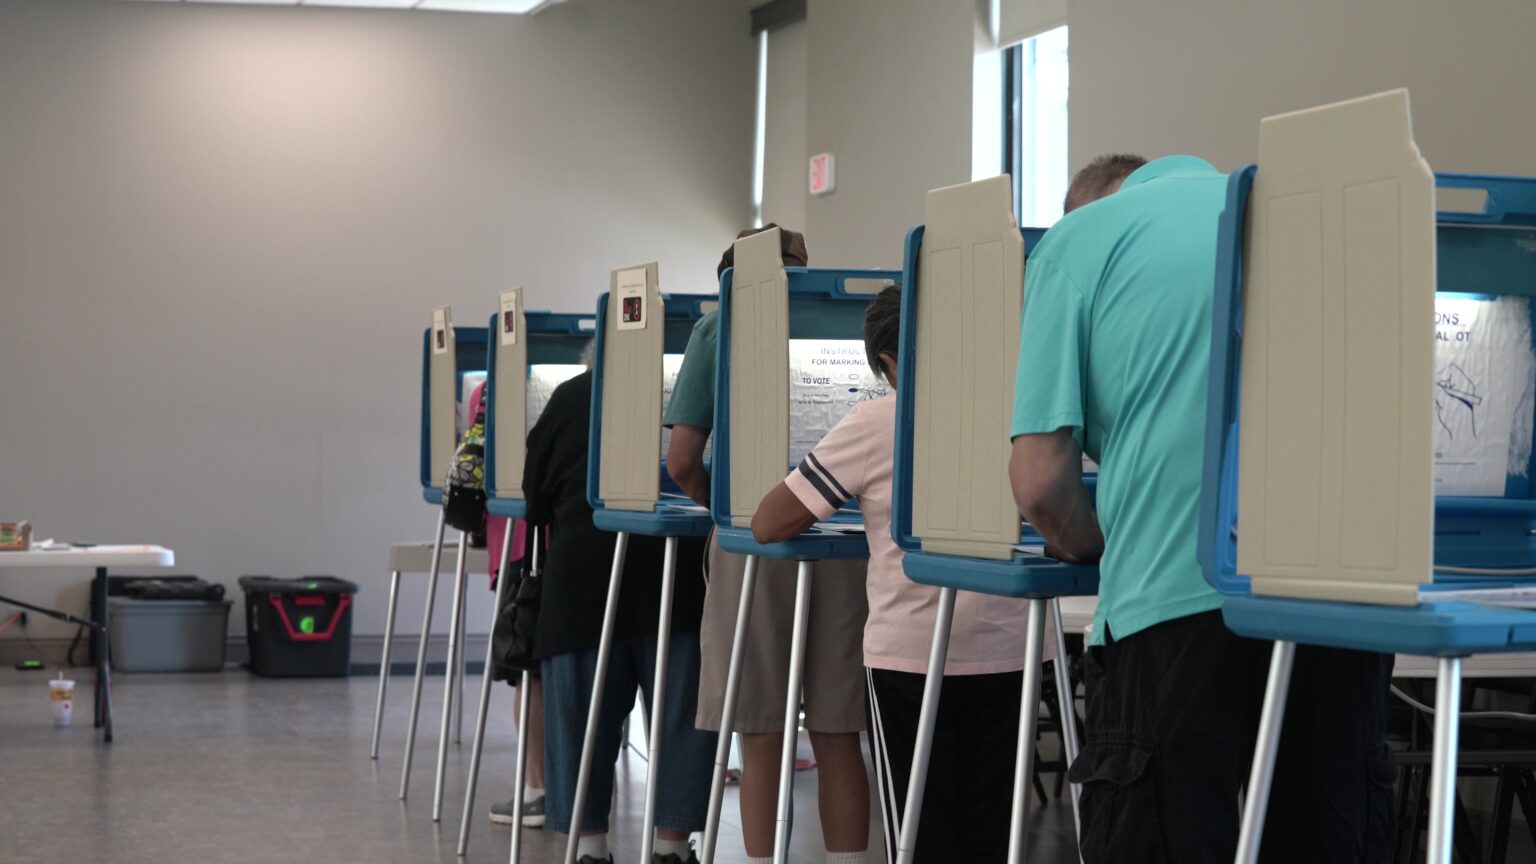 Voters fill out their ballots while standing in a row of privacy cubicles in a large room with blank walls.